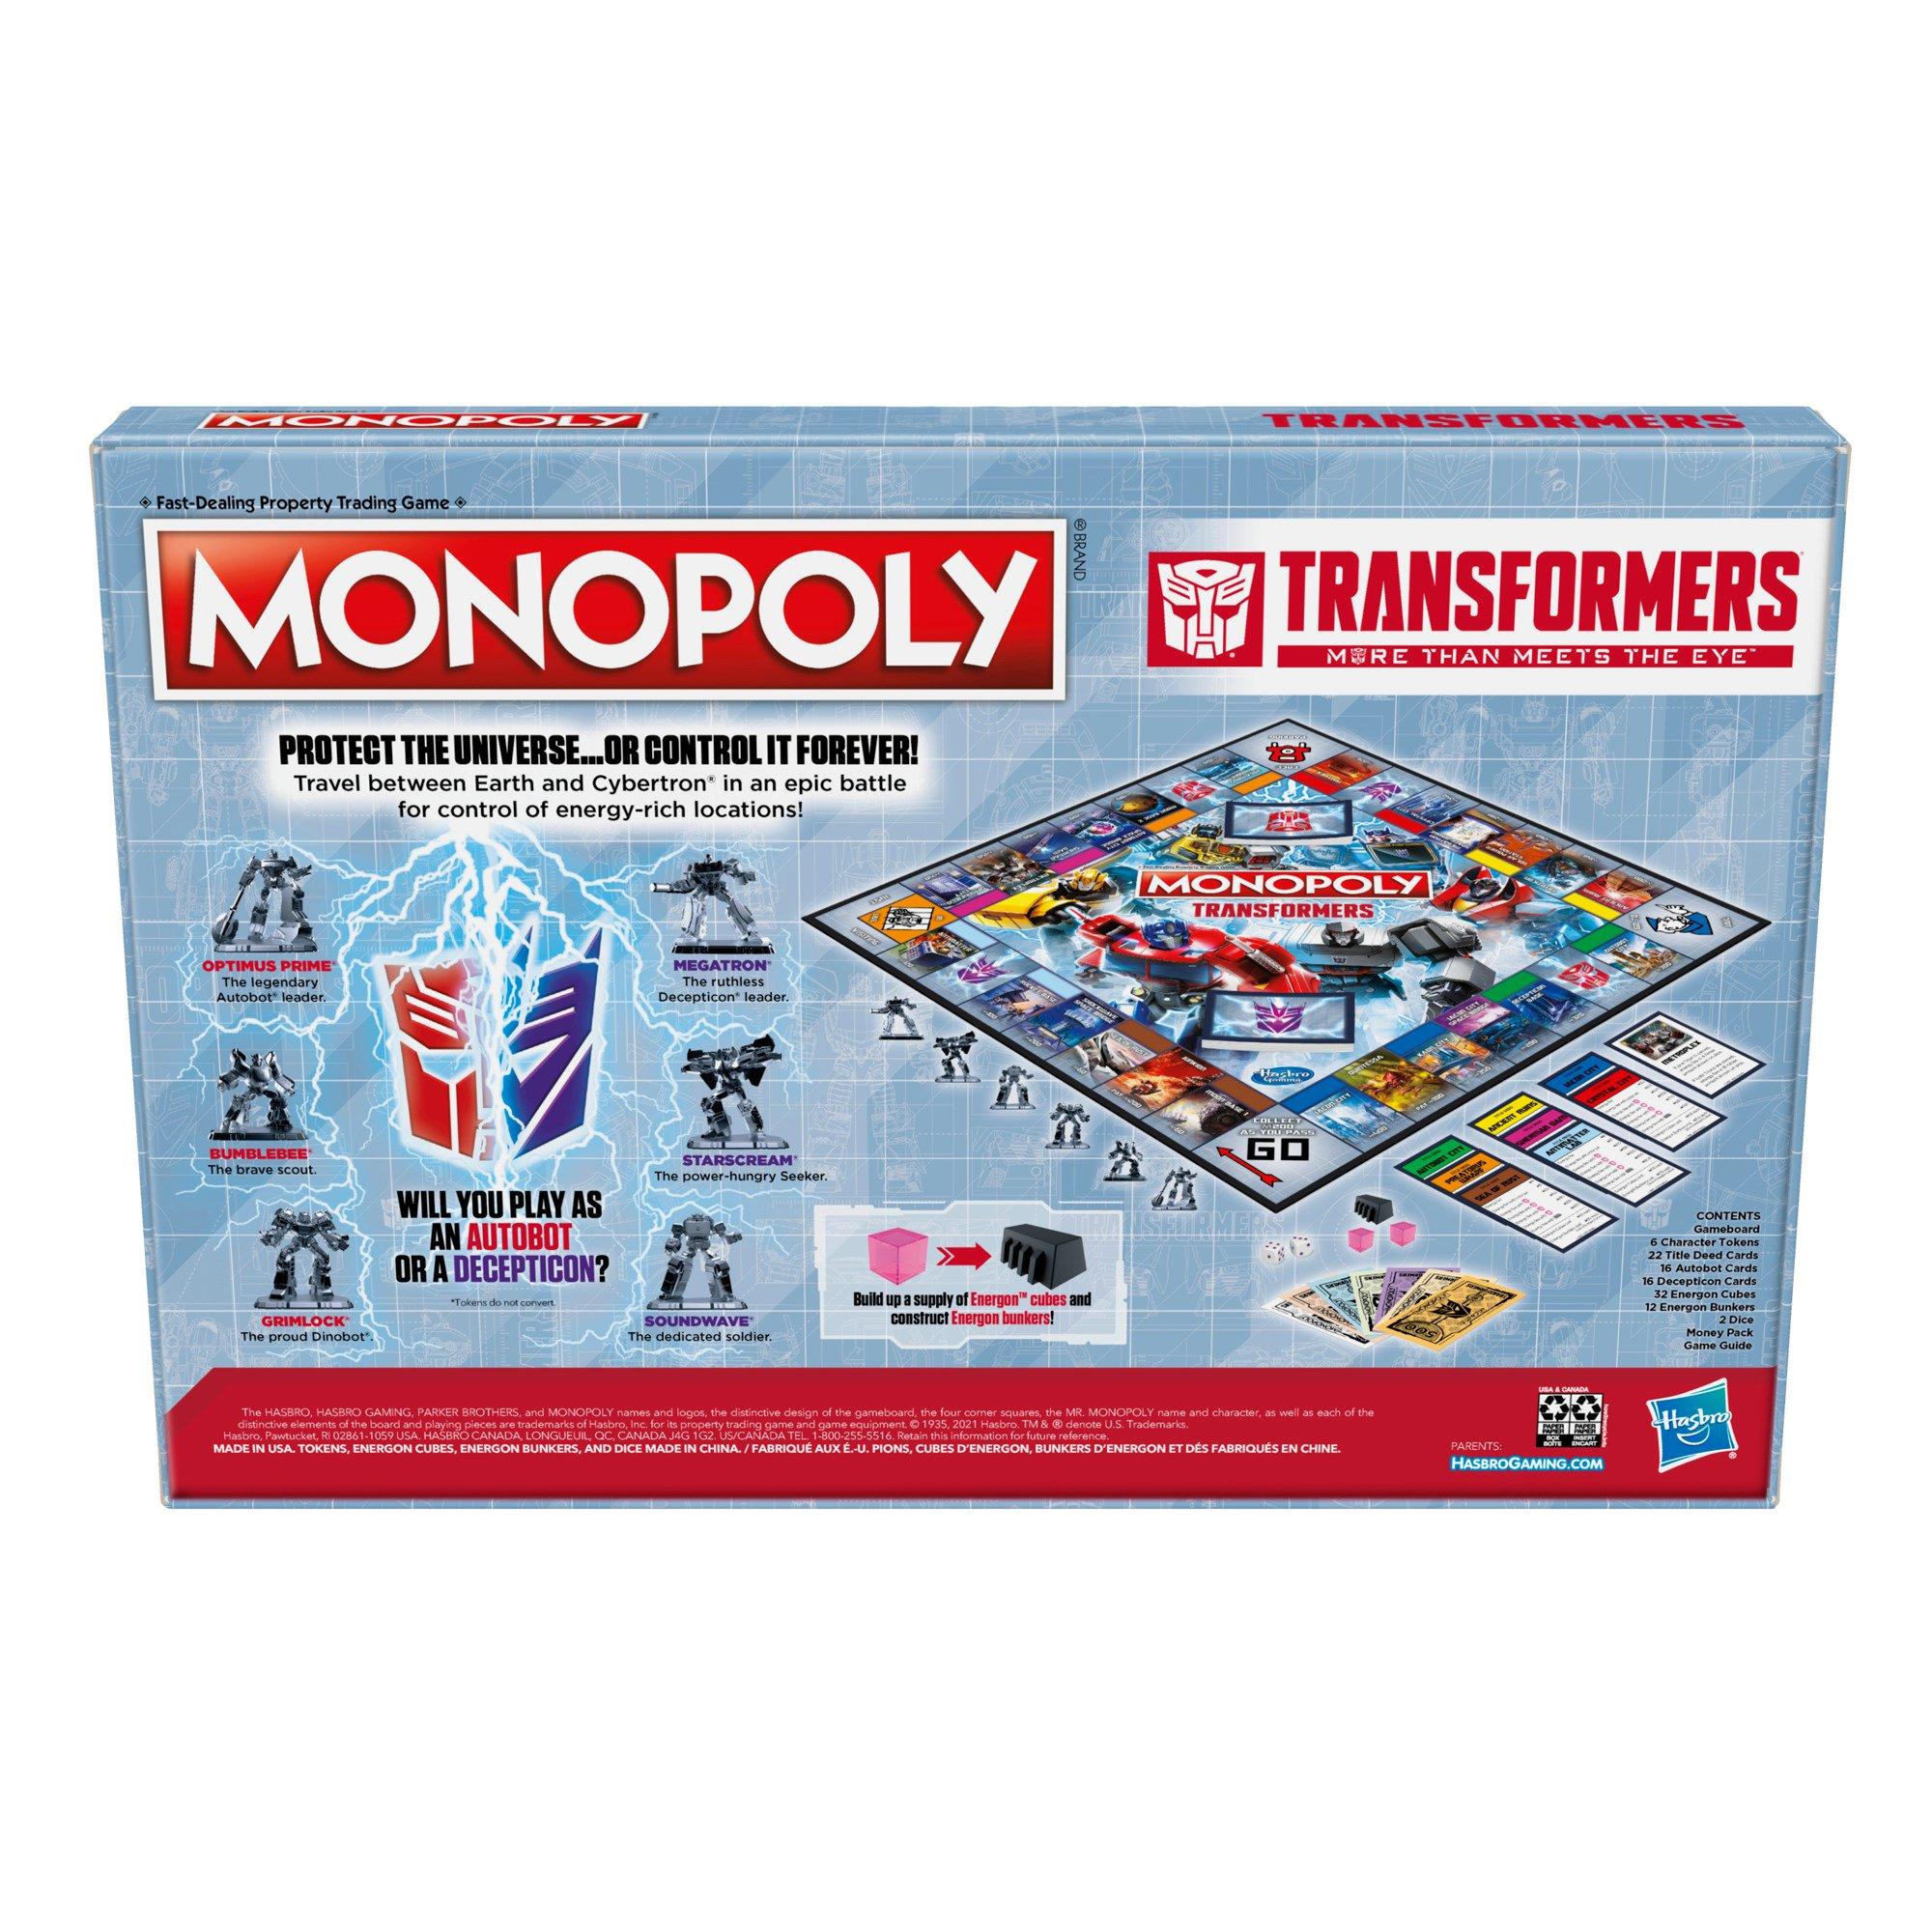 Monopoly Transformers Edition Board Game